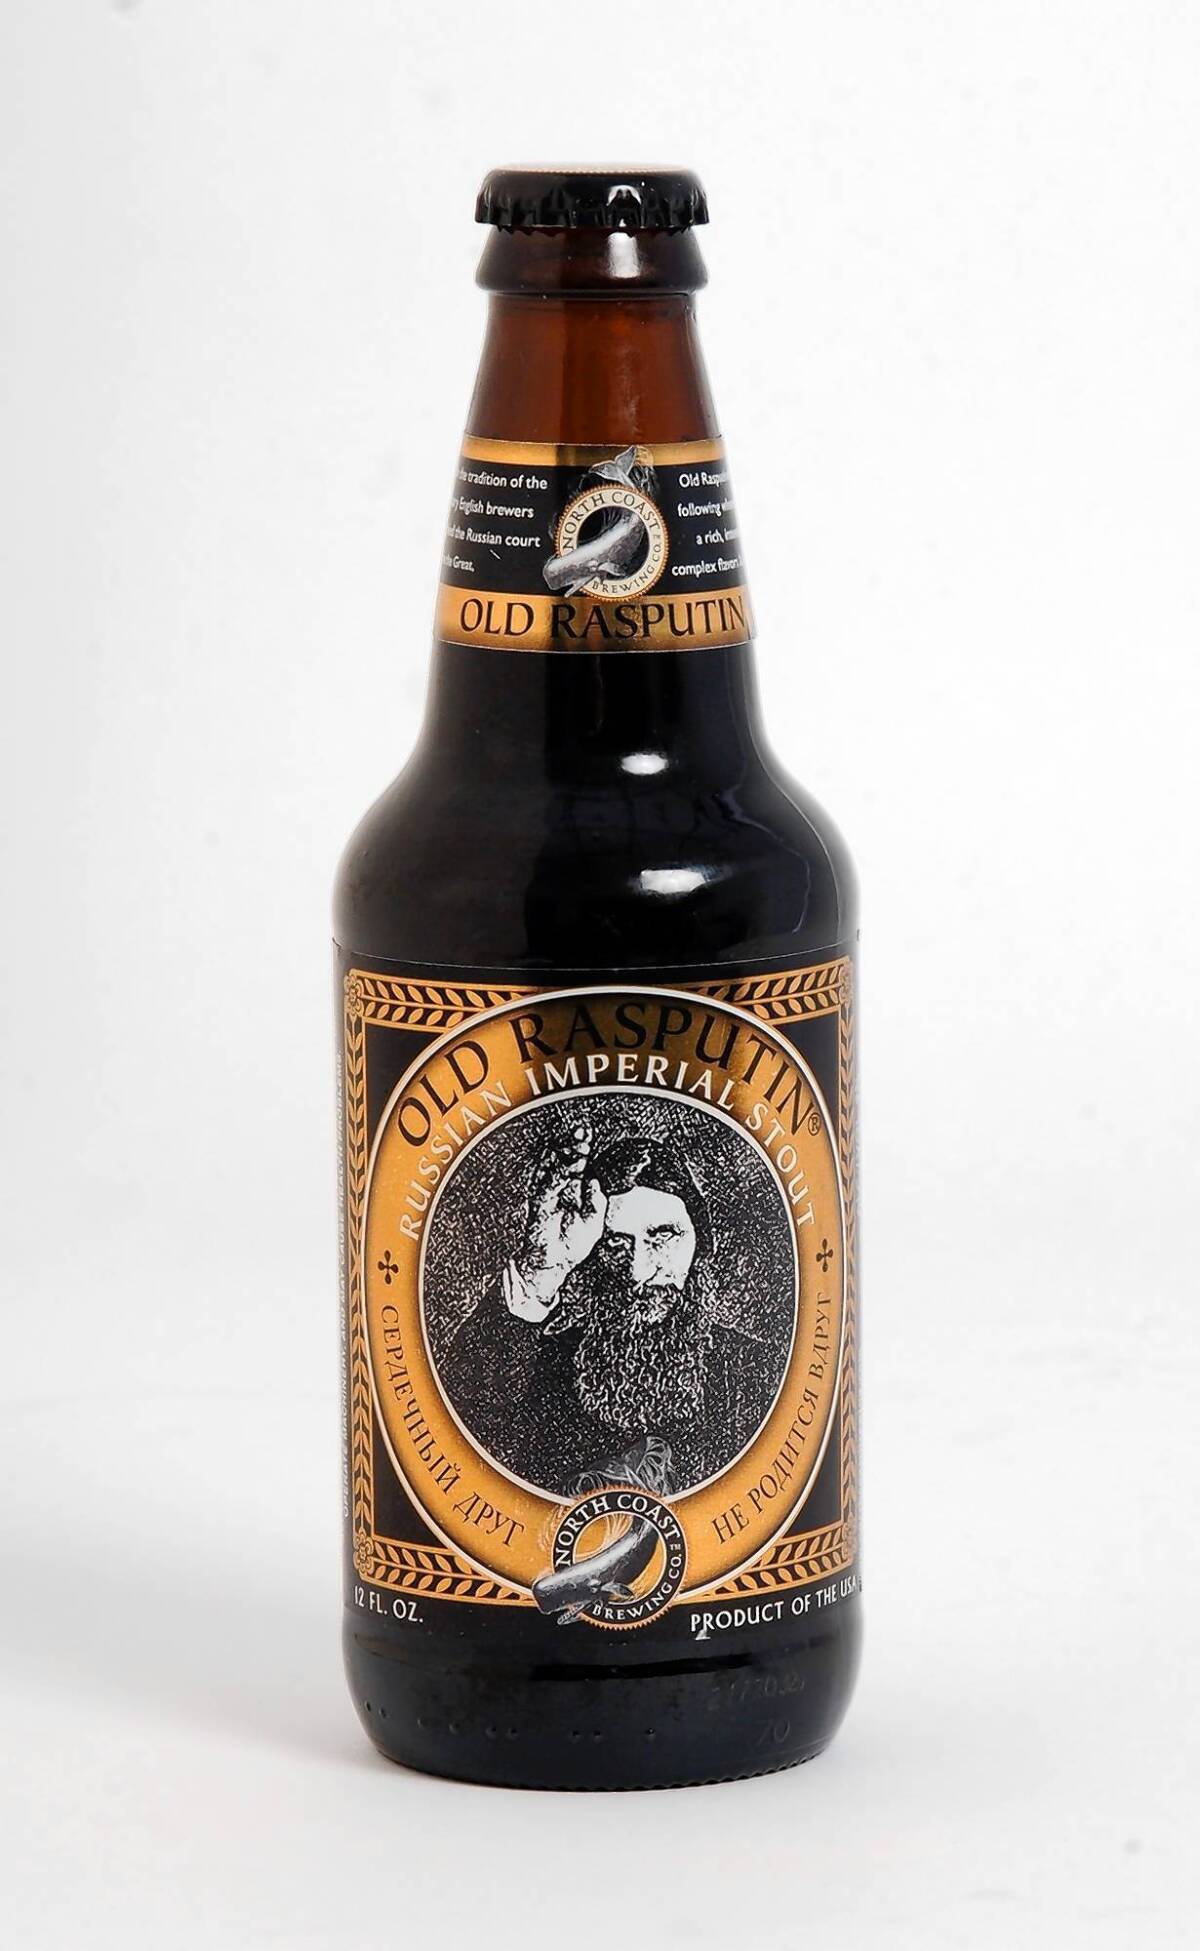 Beer review: North Coast Brewing Co.’s Old Rasputin, a Russian imperial stout